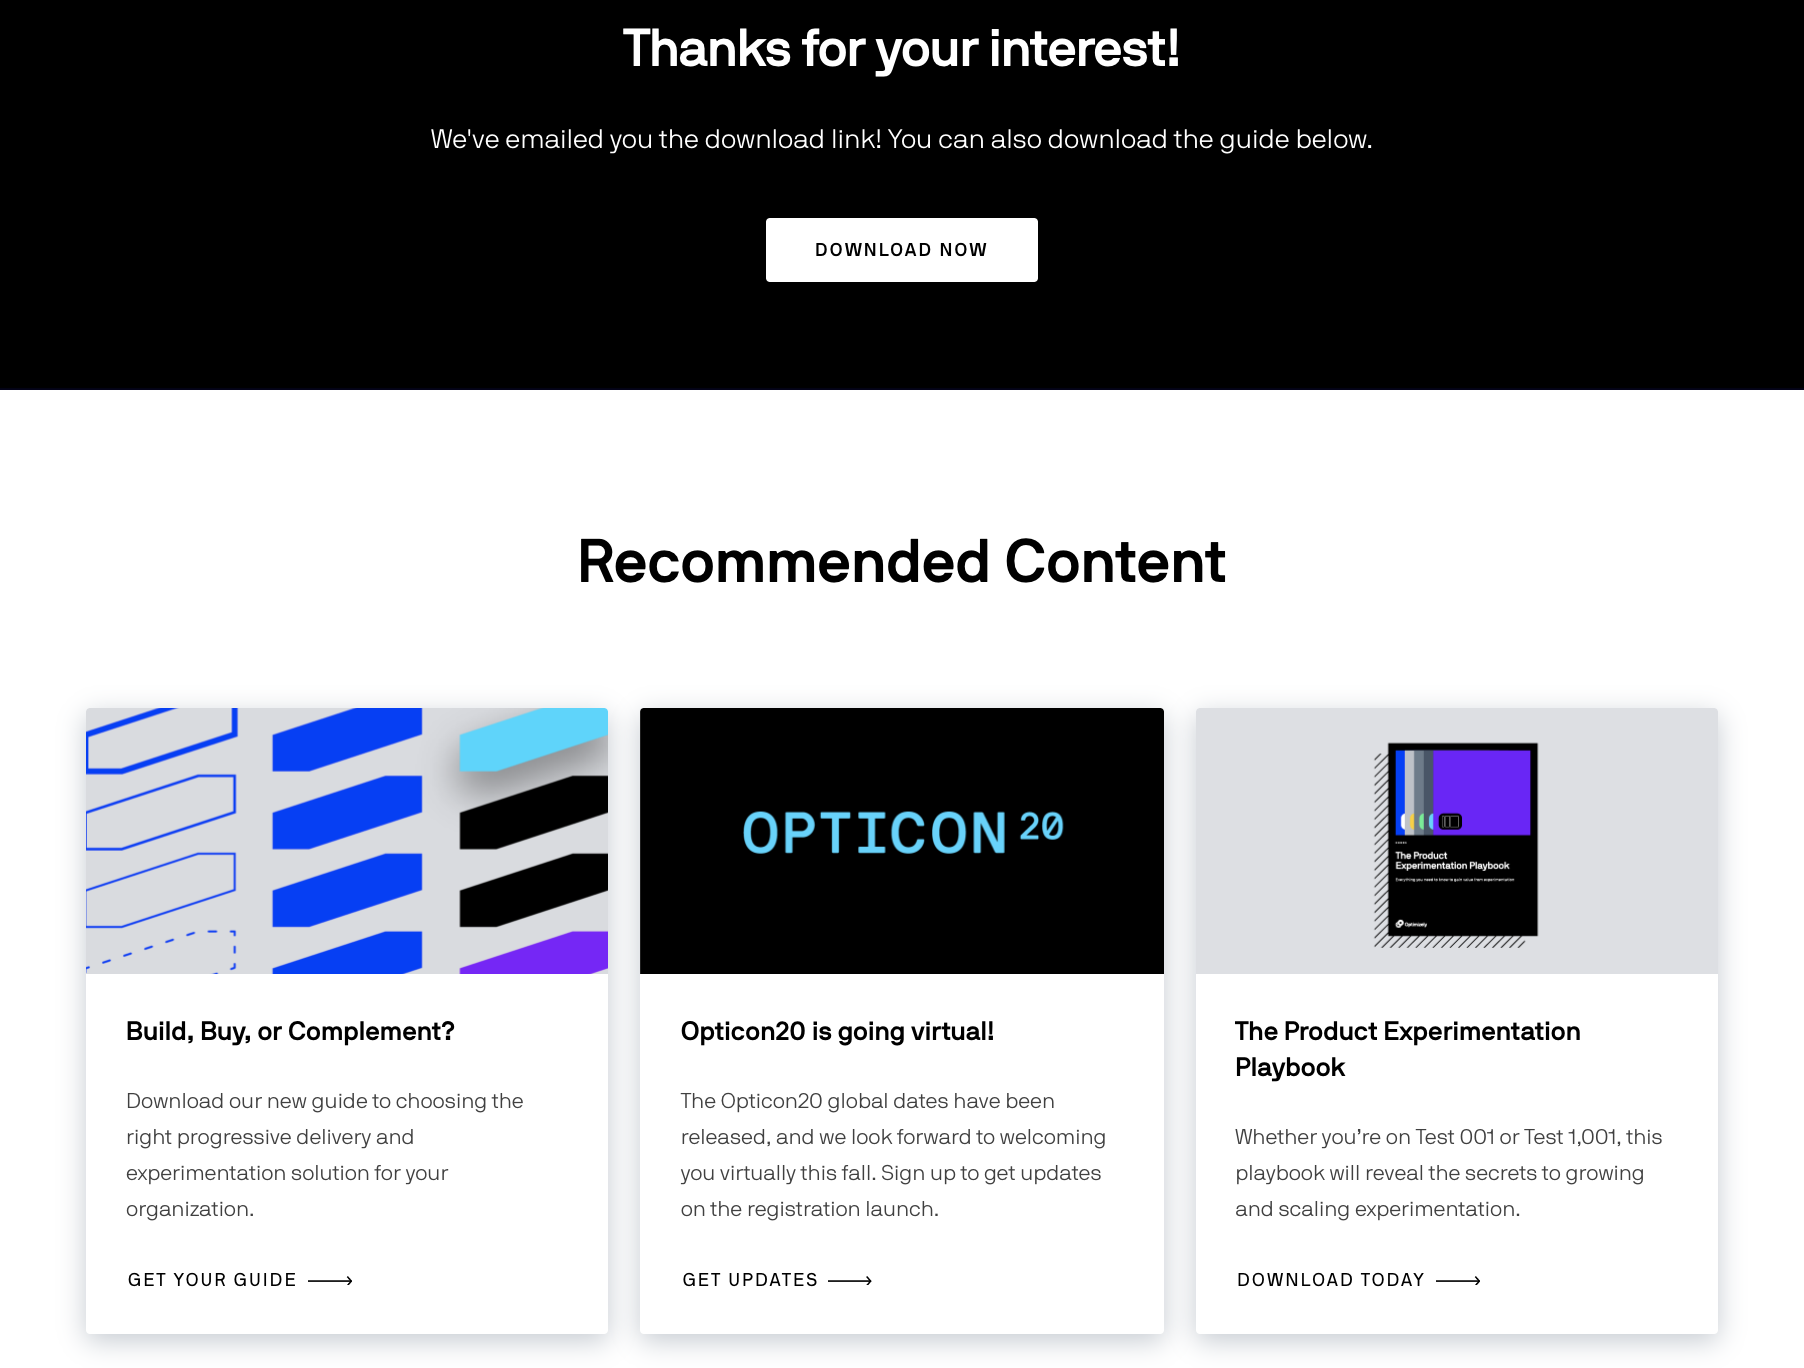 optimizely thank you page with recommended content